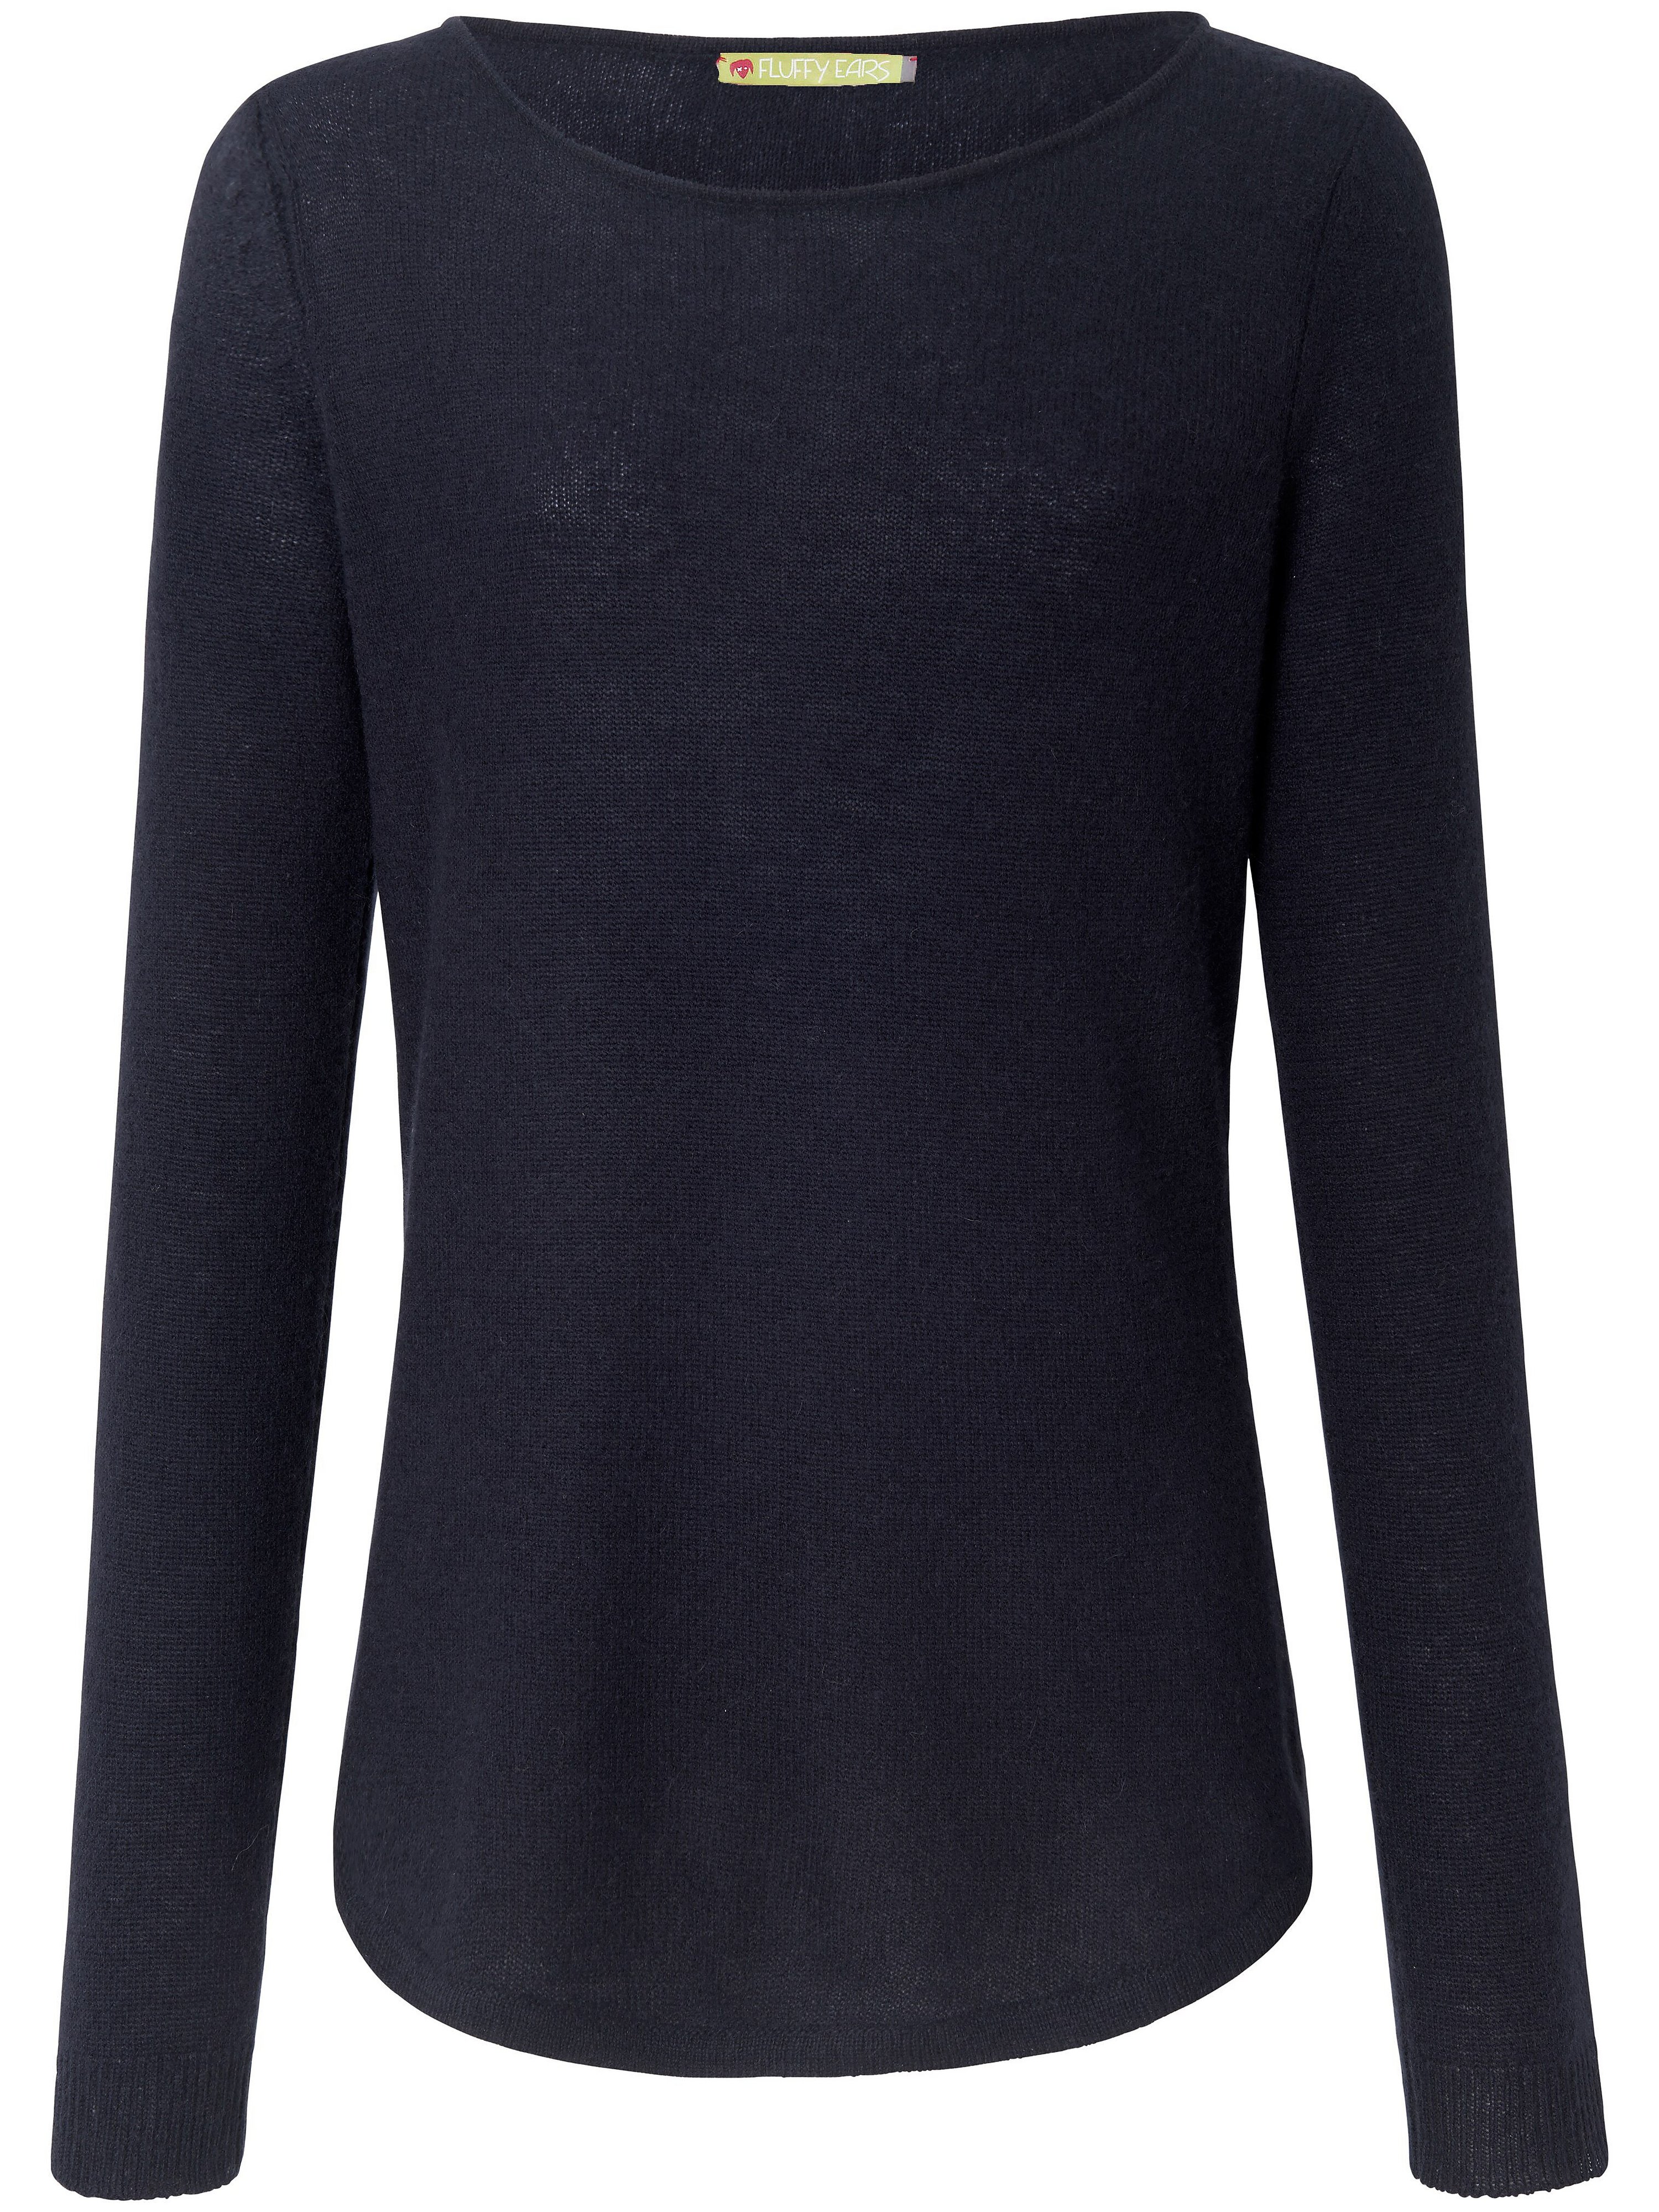 Le pull 100% cachemire  FLUFFY EARS bleu taille 48